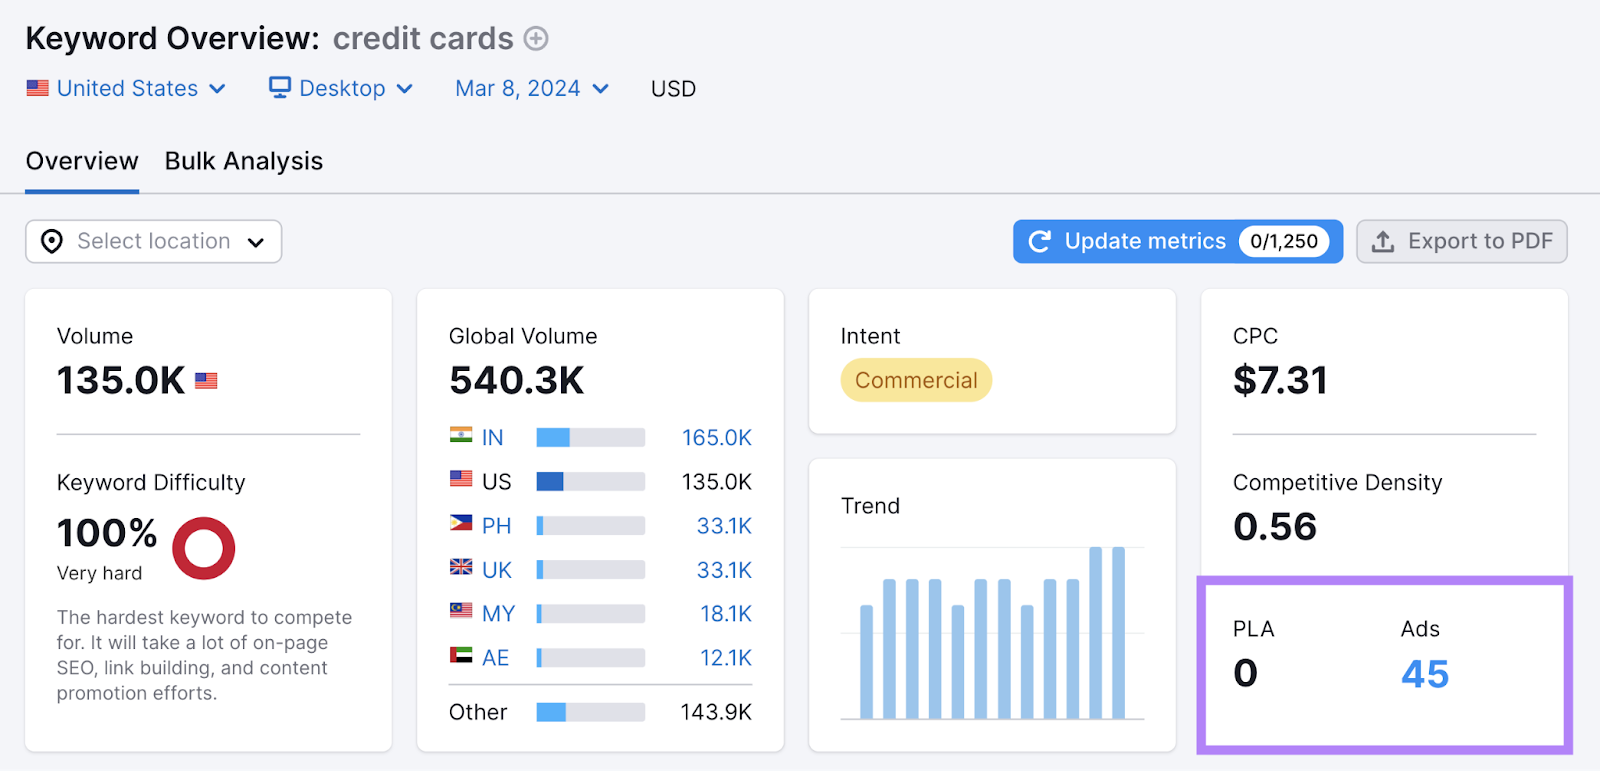 PLA and Ads information  for "credit cards" shown successful  Keyword Overview